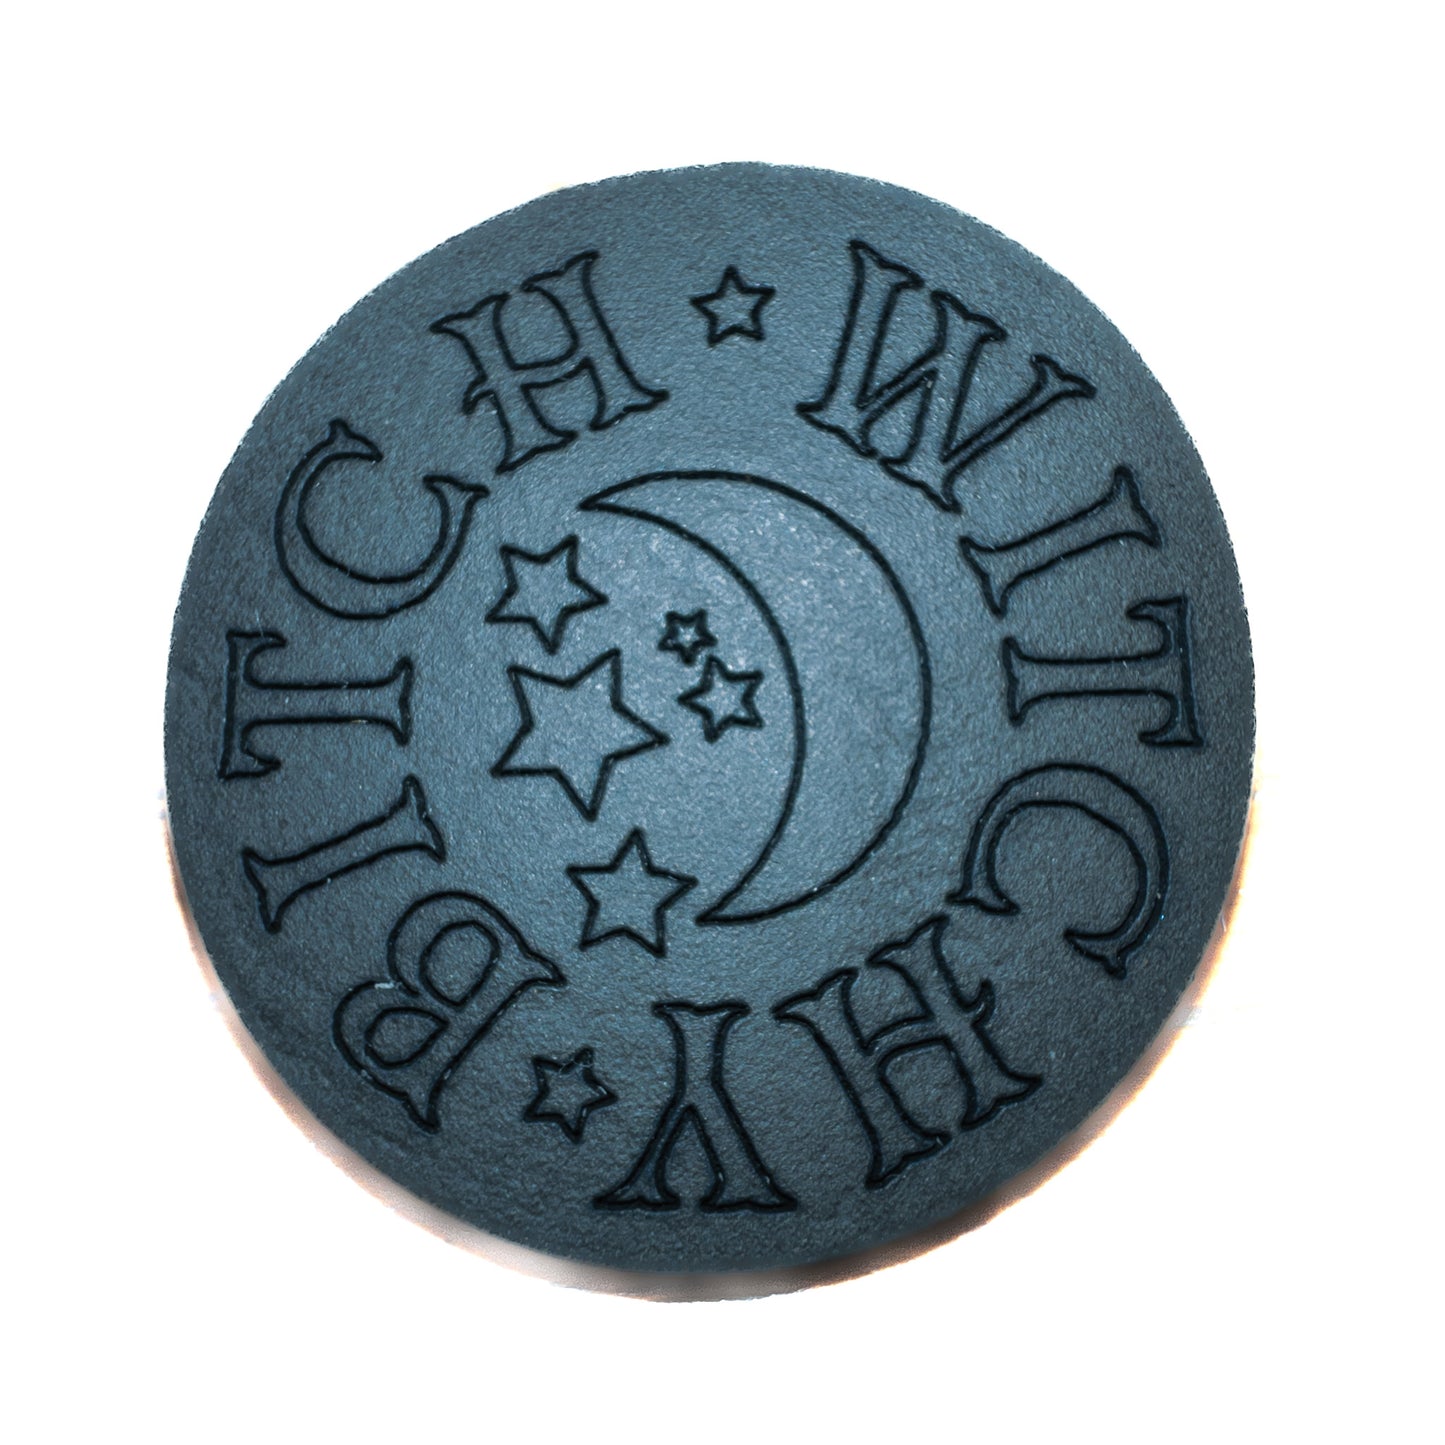 Naughty Text Witchy Bitch Pin